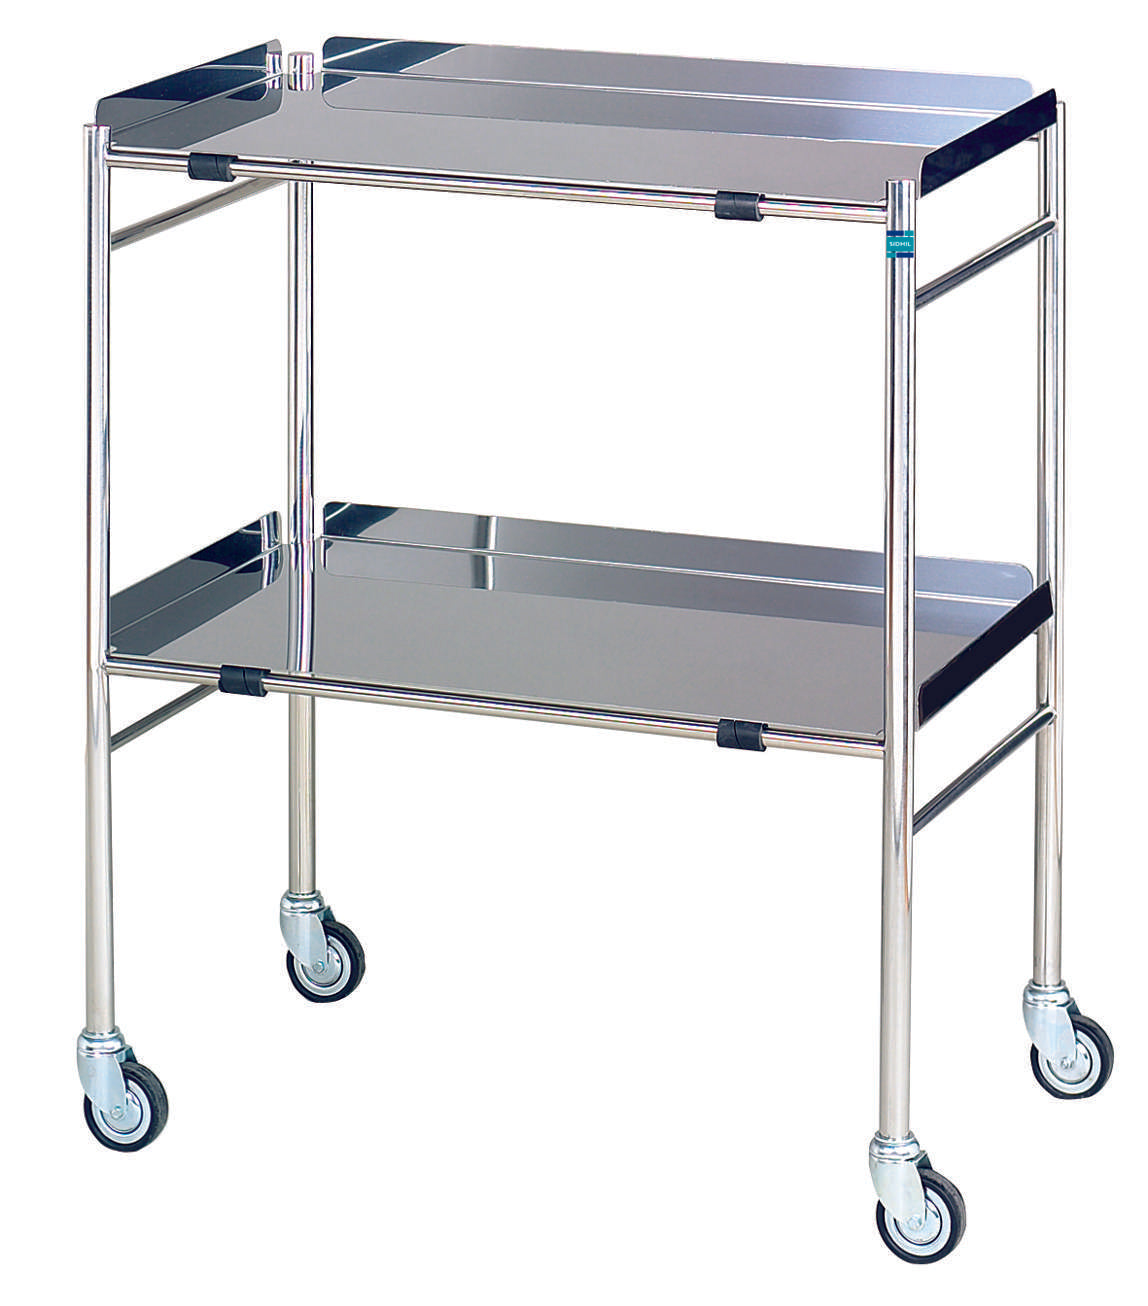 Hastings Stainless Steel Surgical Trolley